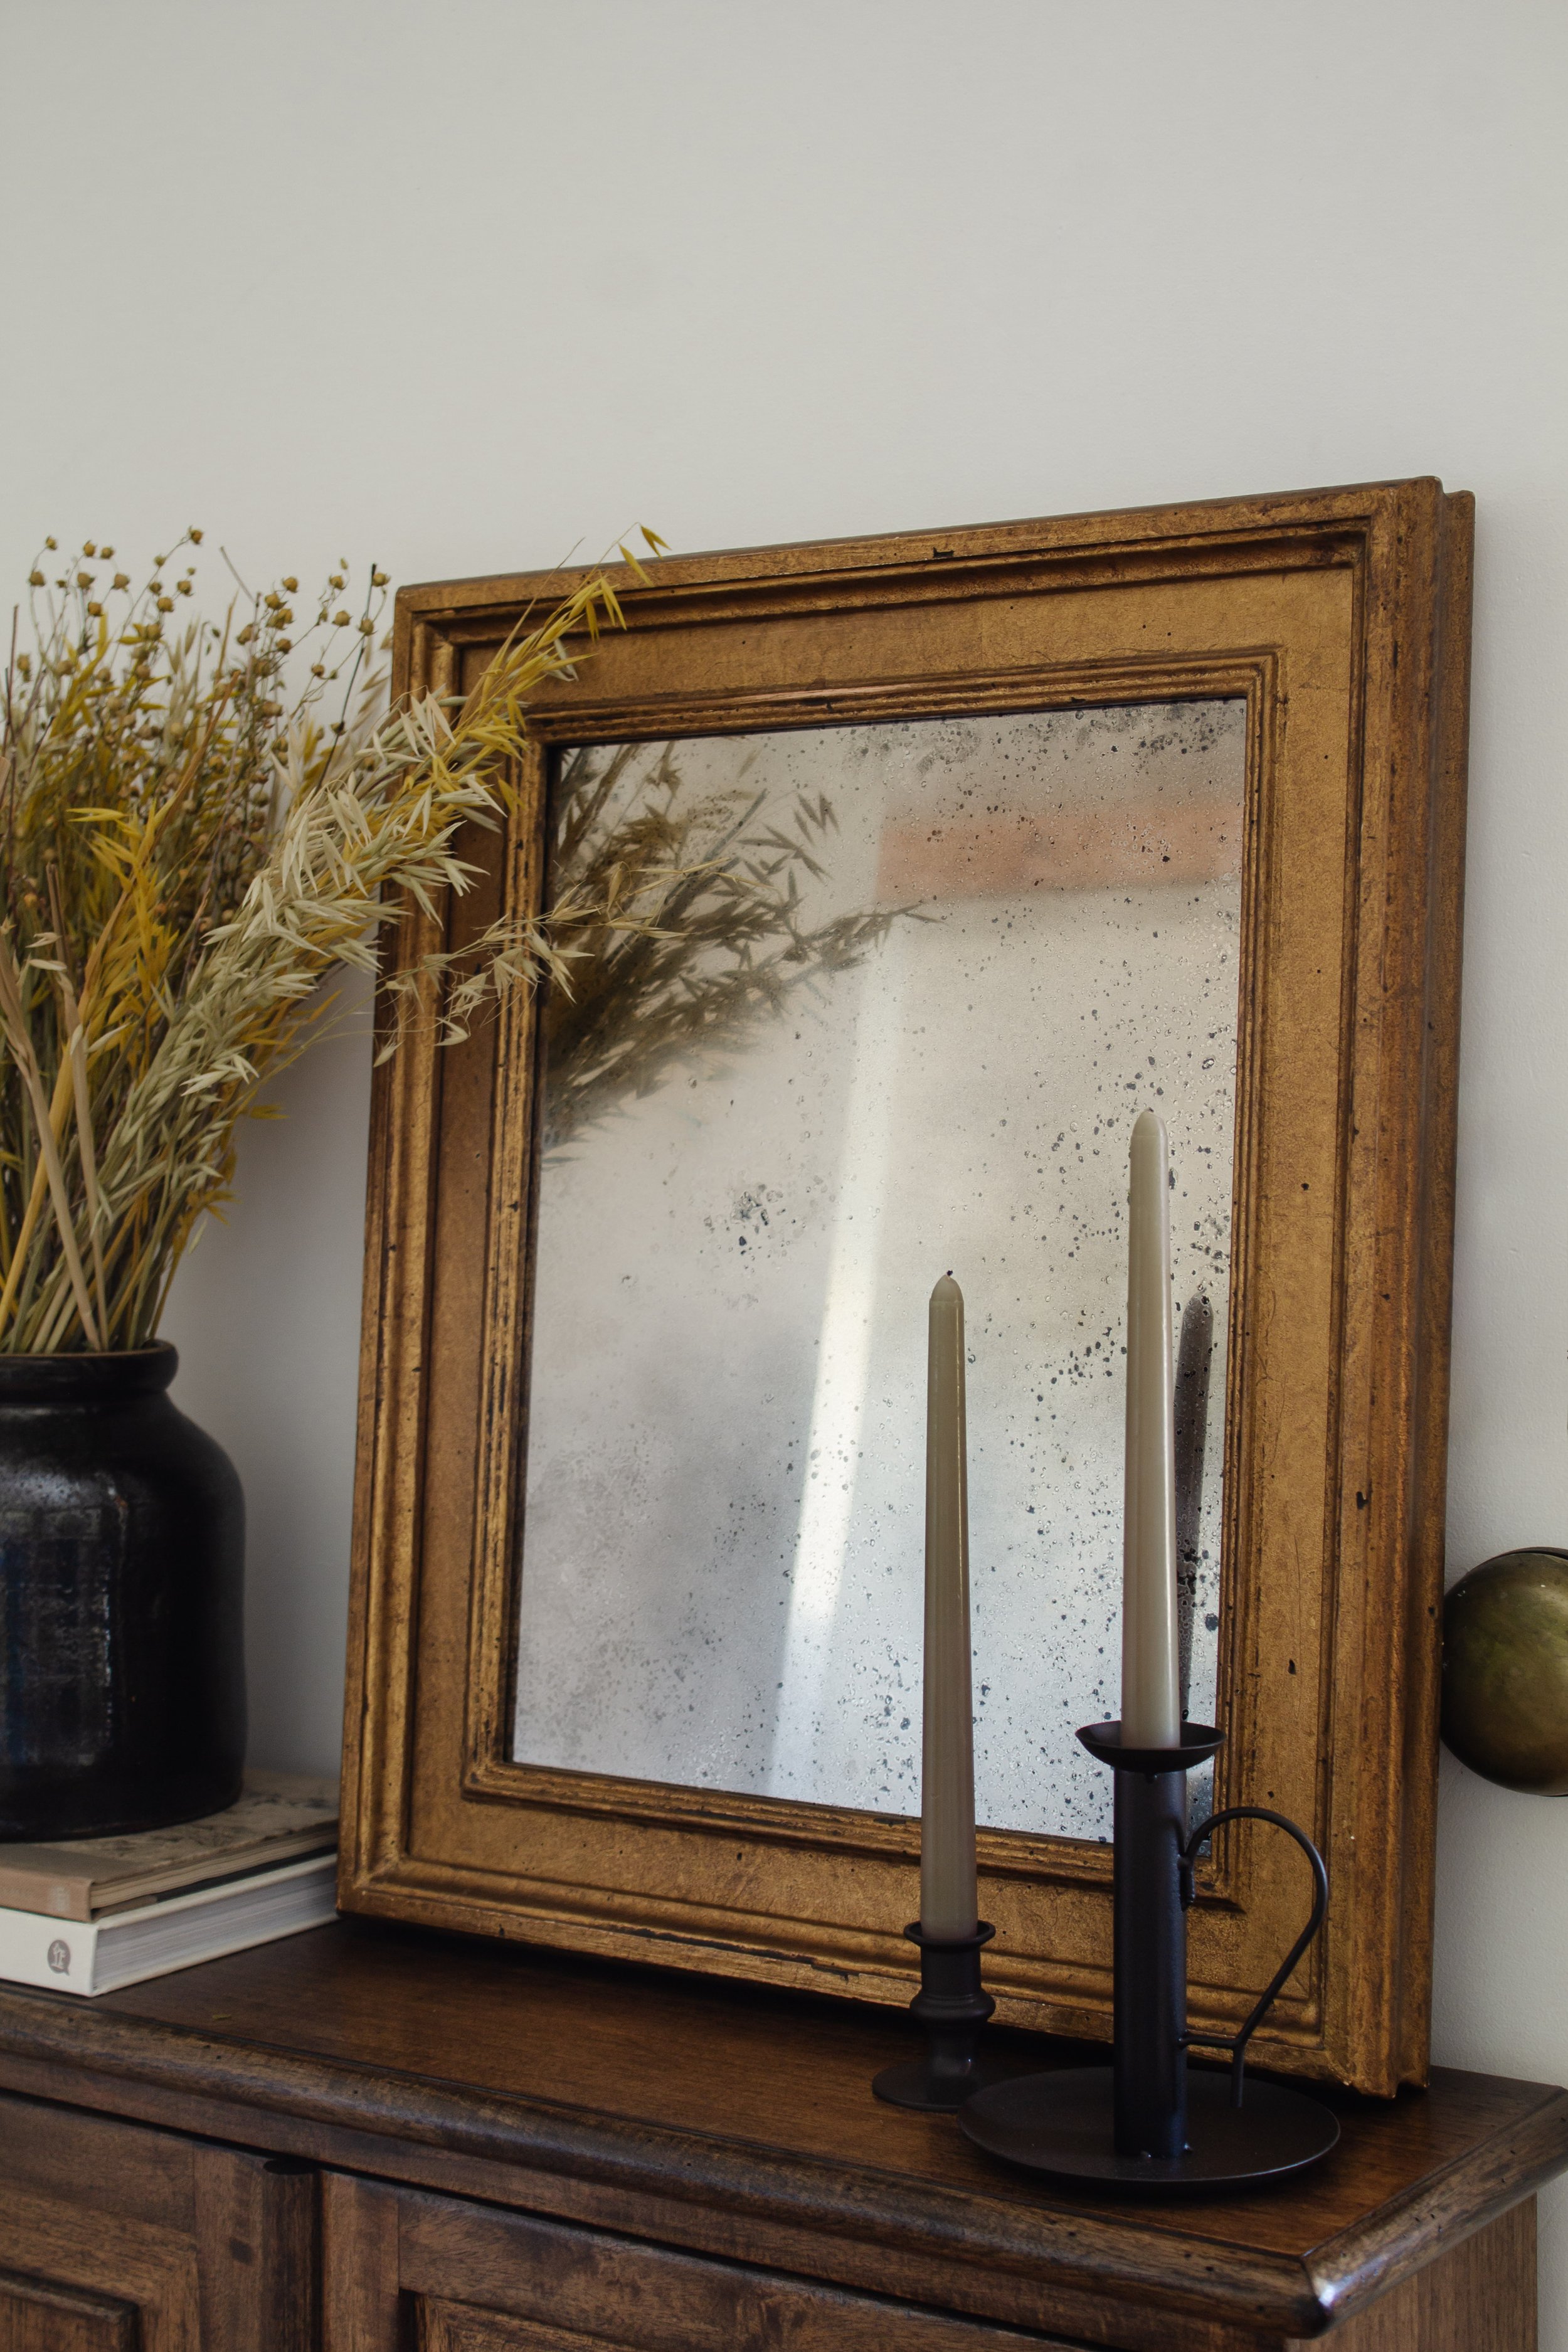 How To Diy Antique Mirror For Less, How Do You Make A Gold Mirror Frame Look Antique